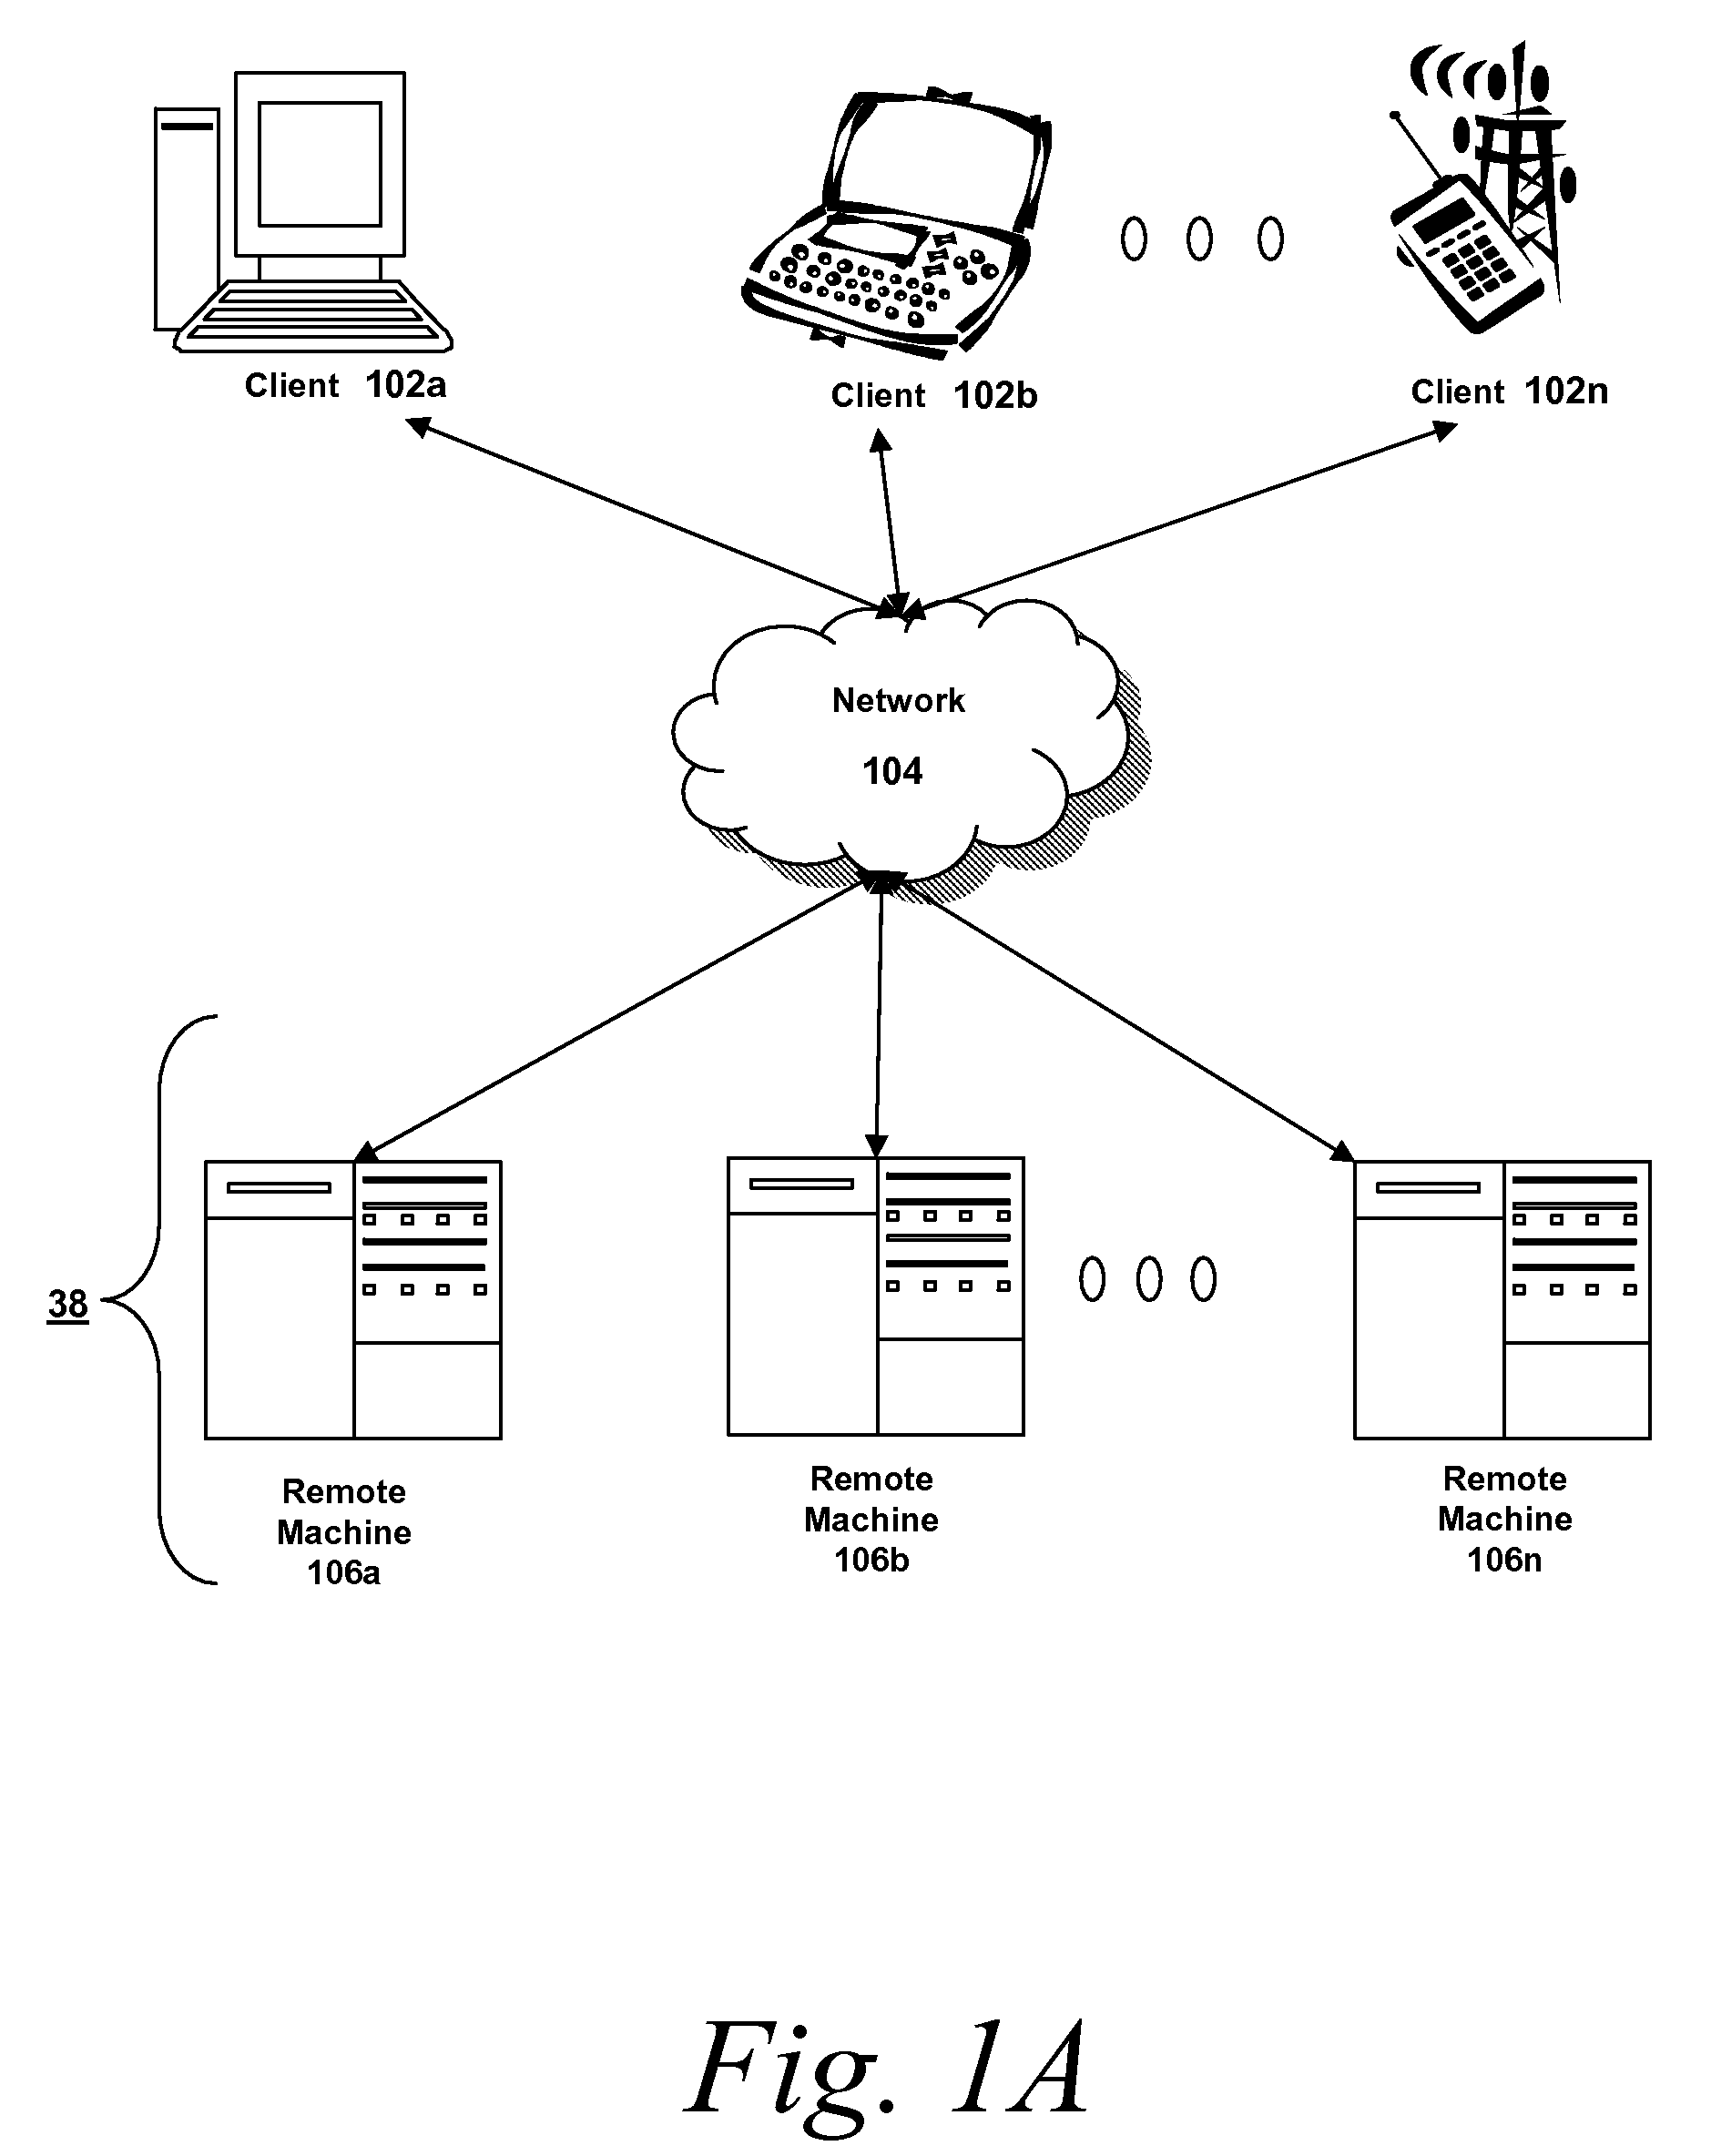 Method and System for Establishing a Dedicated Session for a Member of a Common Frame Buffer Group